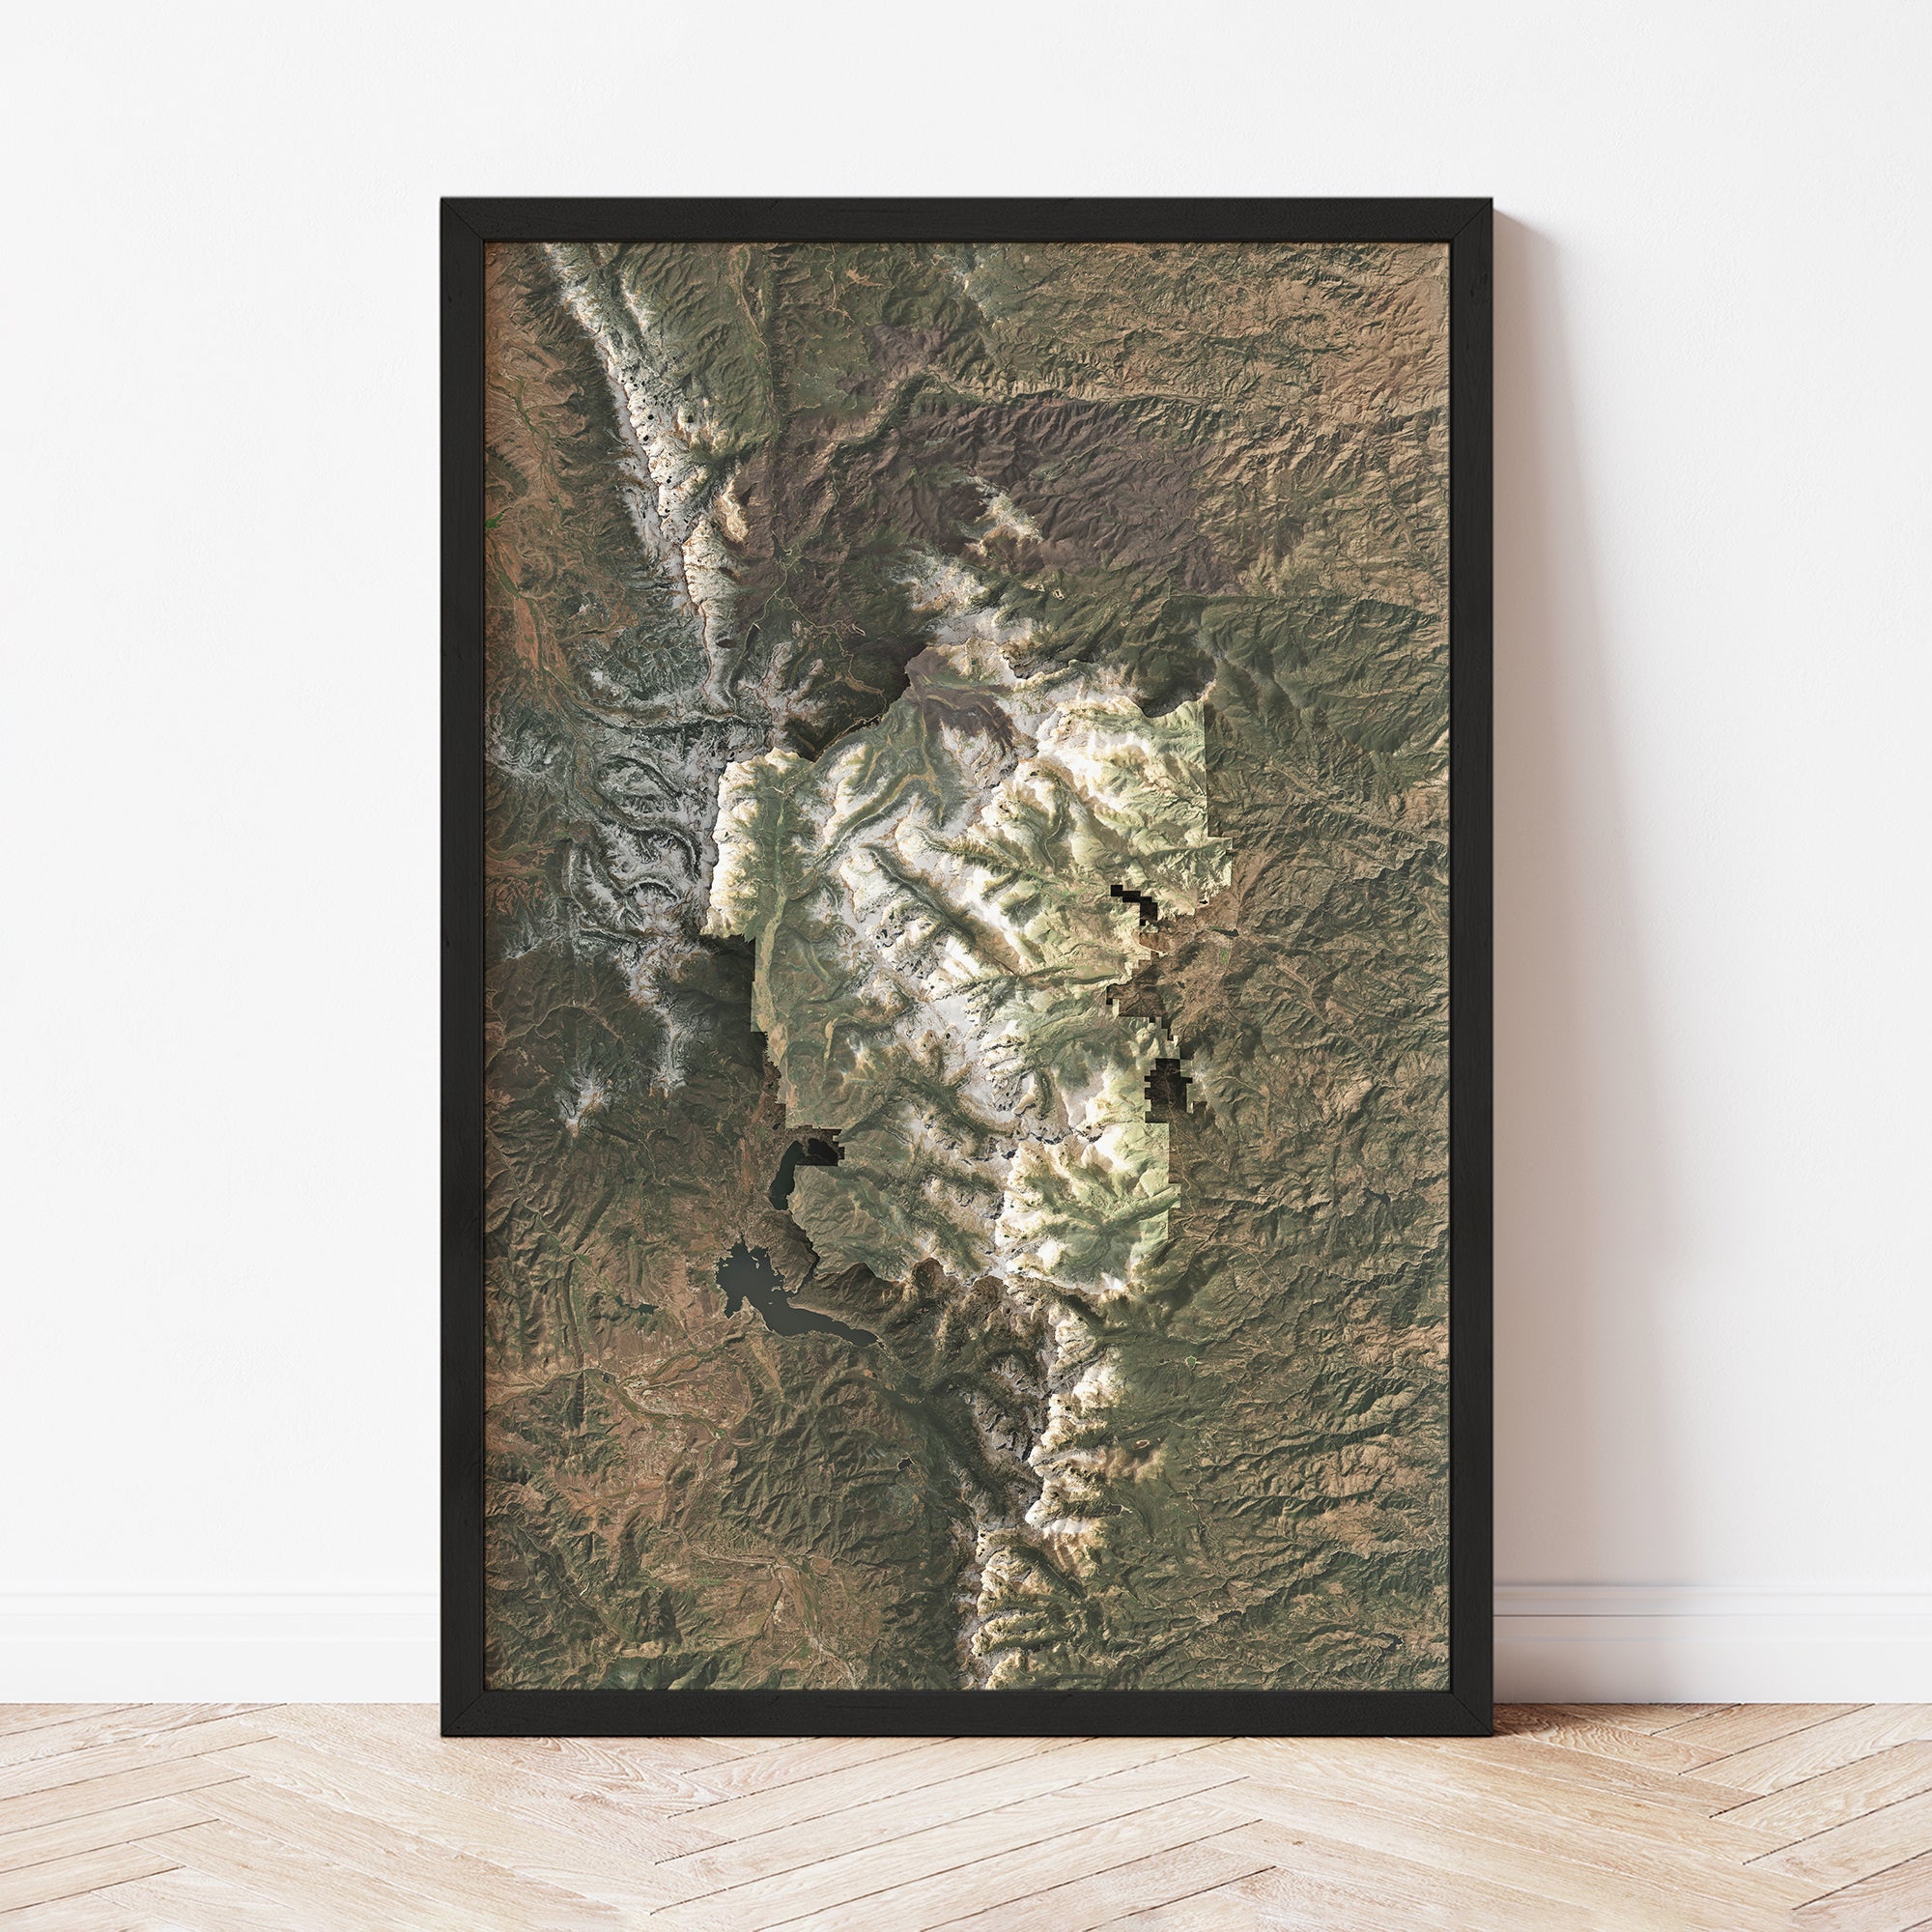 Rocky Mountain National Park - Satellite Imagery